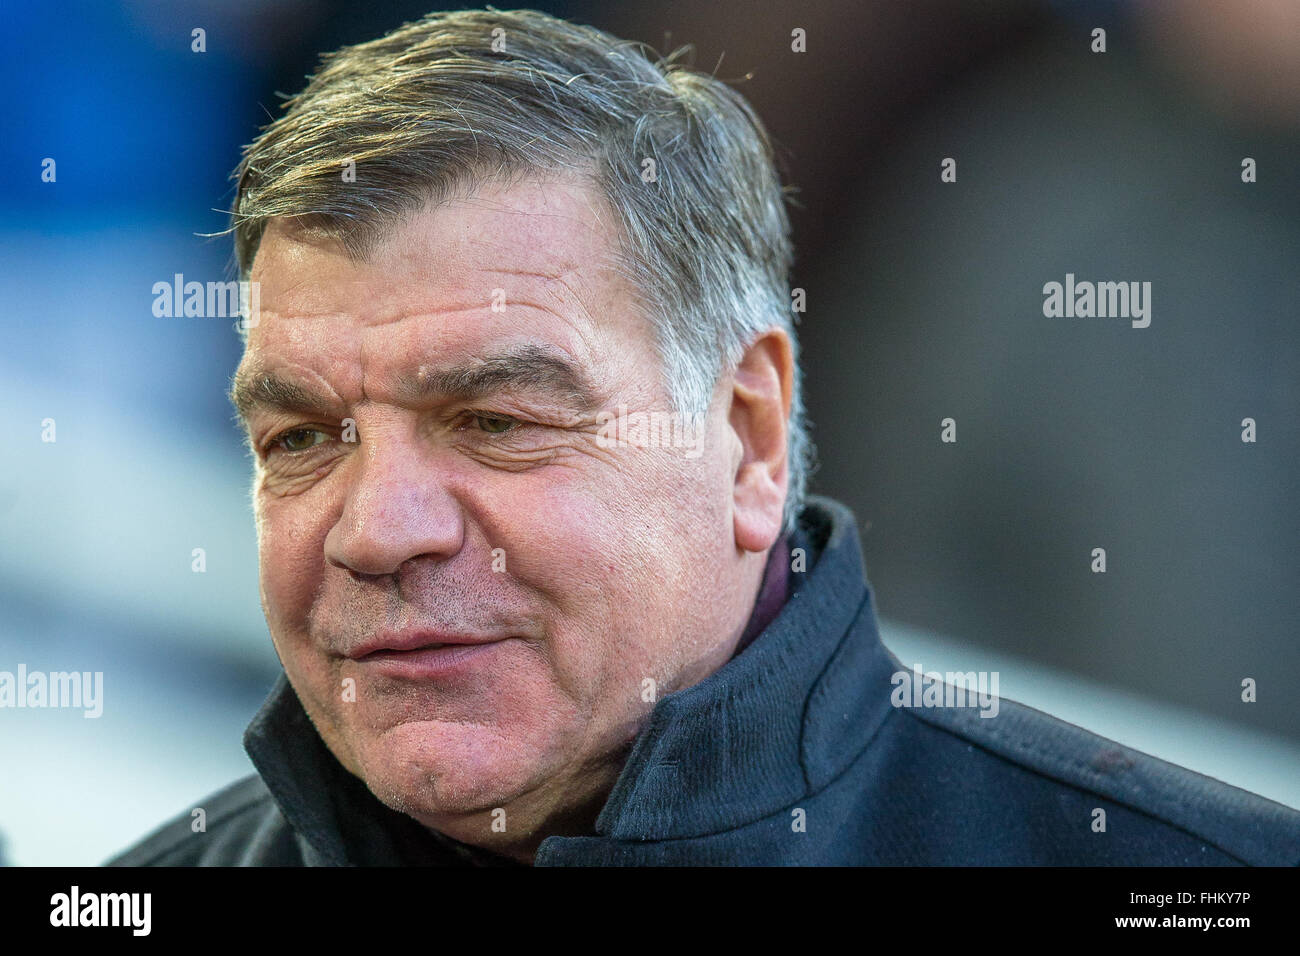 West Ham manager, Sam Allardyce prepares to watch his side take on Leicester FC at Upton Park on December, 20, 2014. Stock Photo